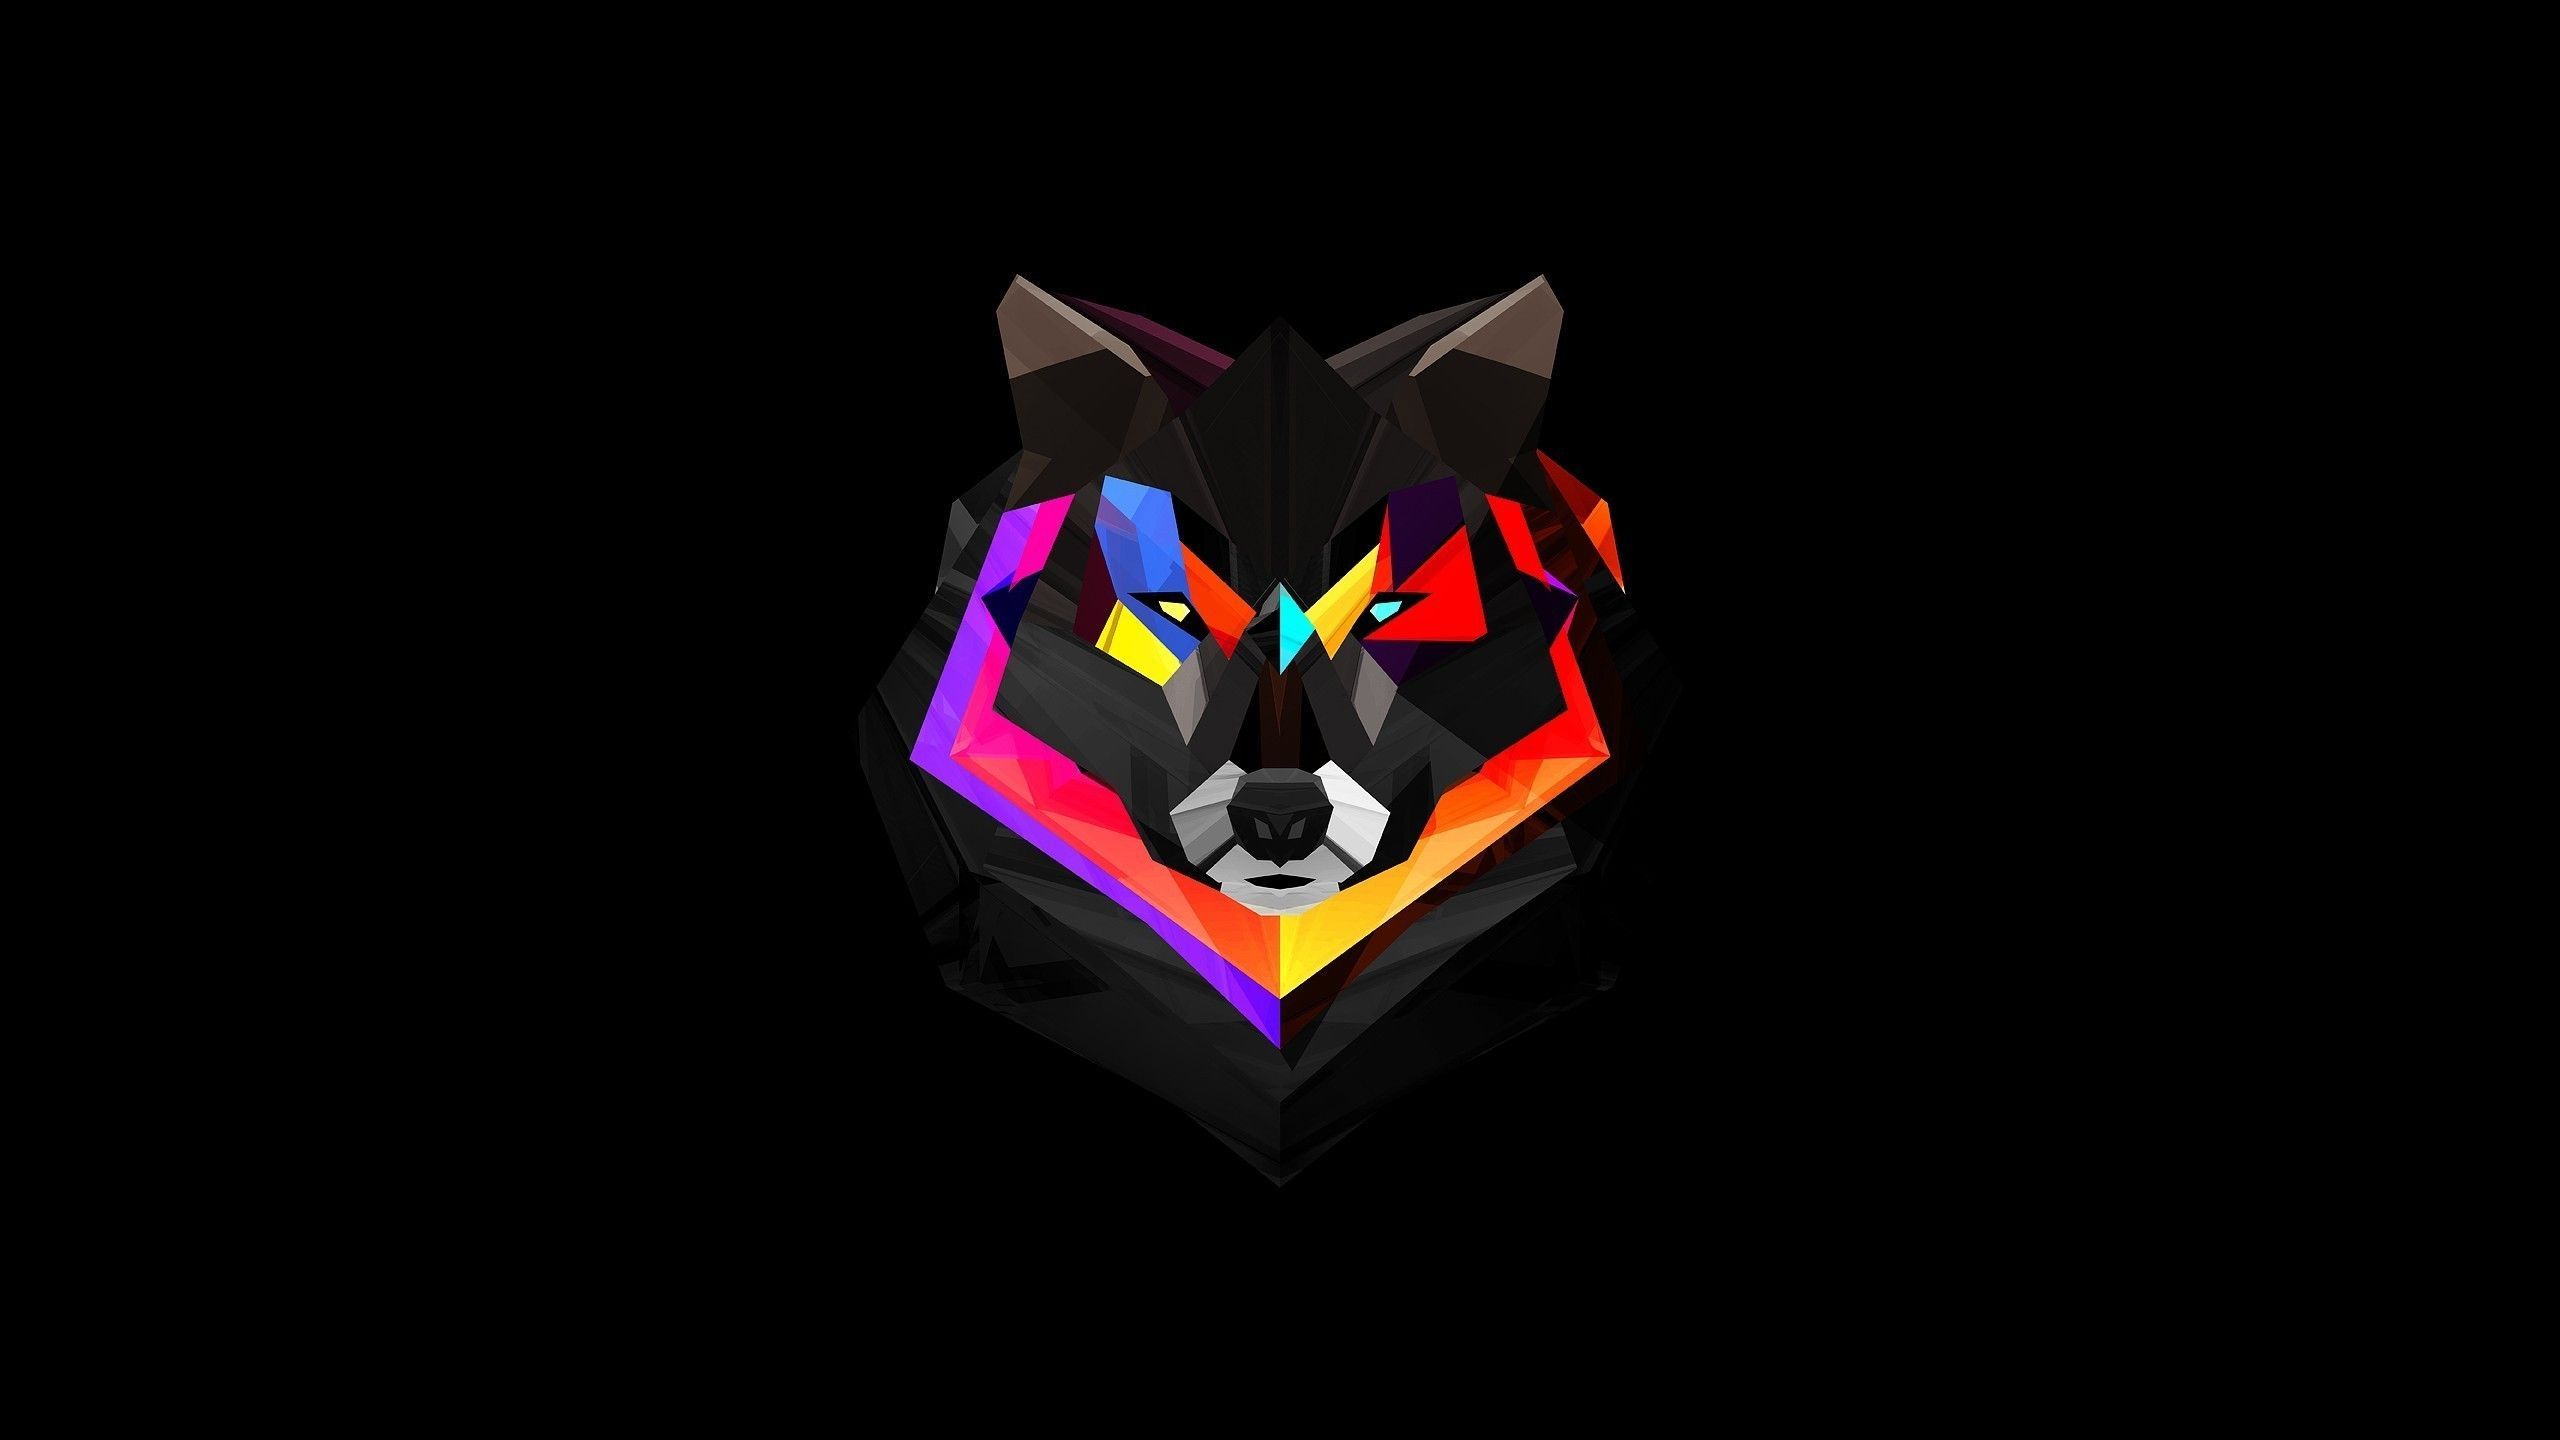 Abstract Wolf Wallpapers